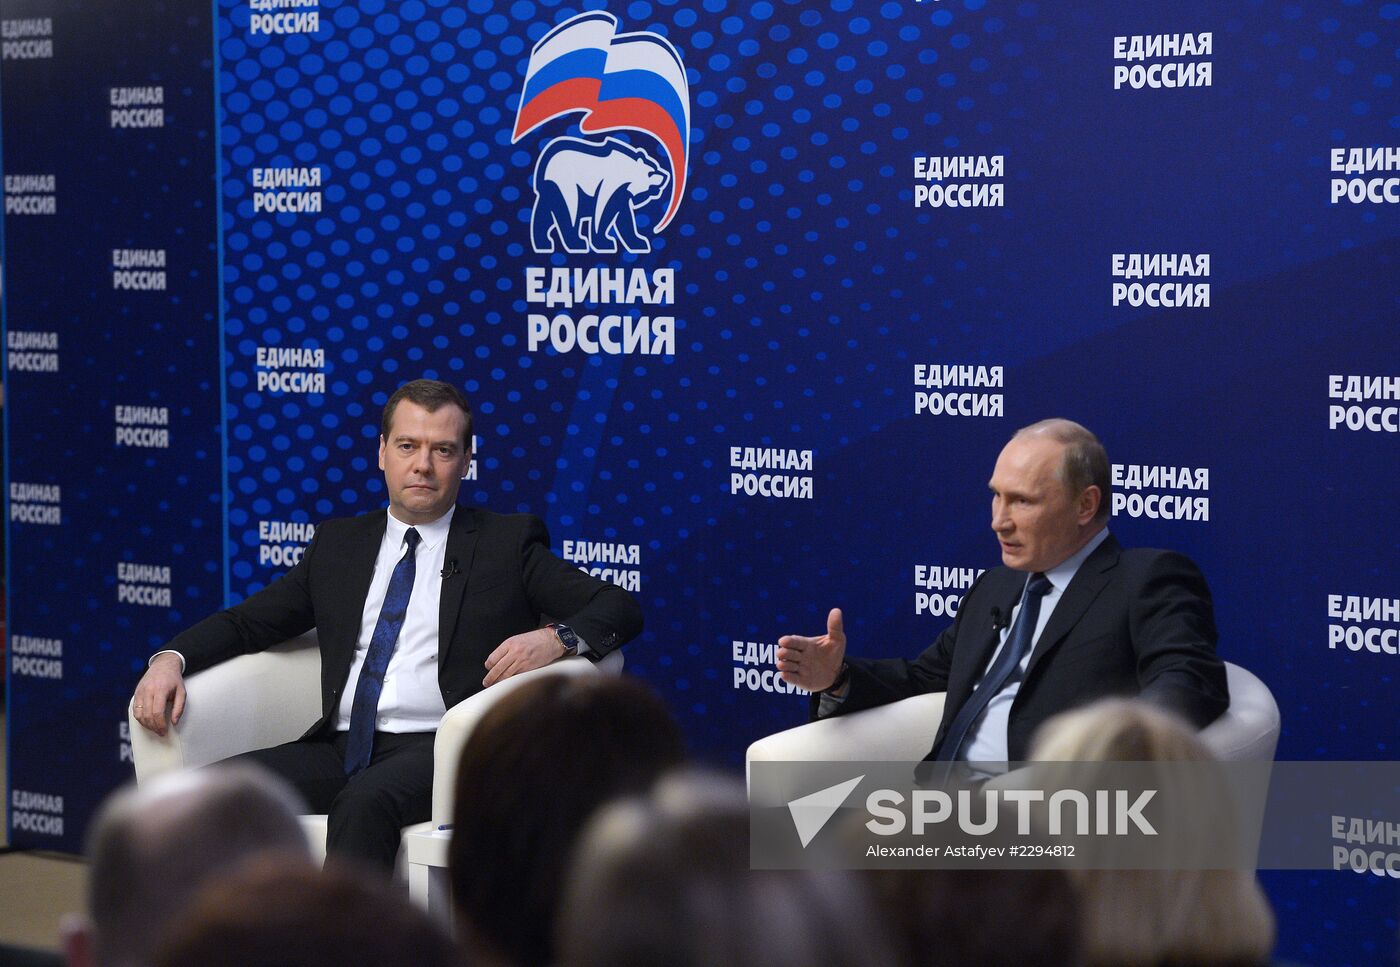 Putin,Medvedev meet with United Russia Party activits